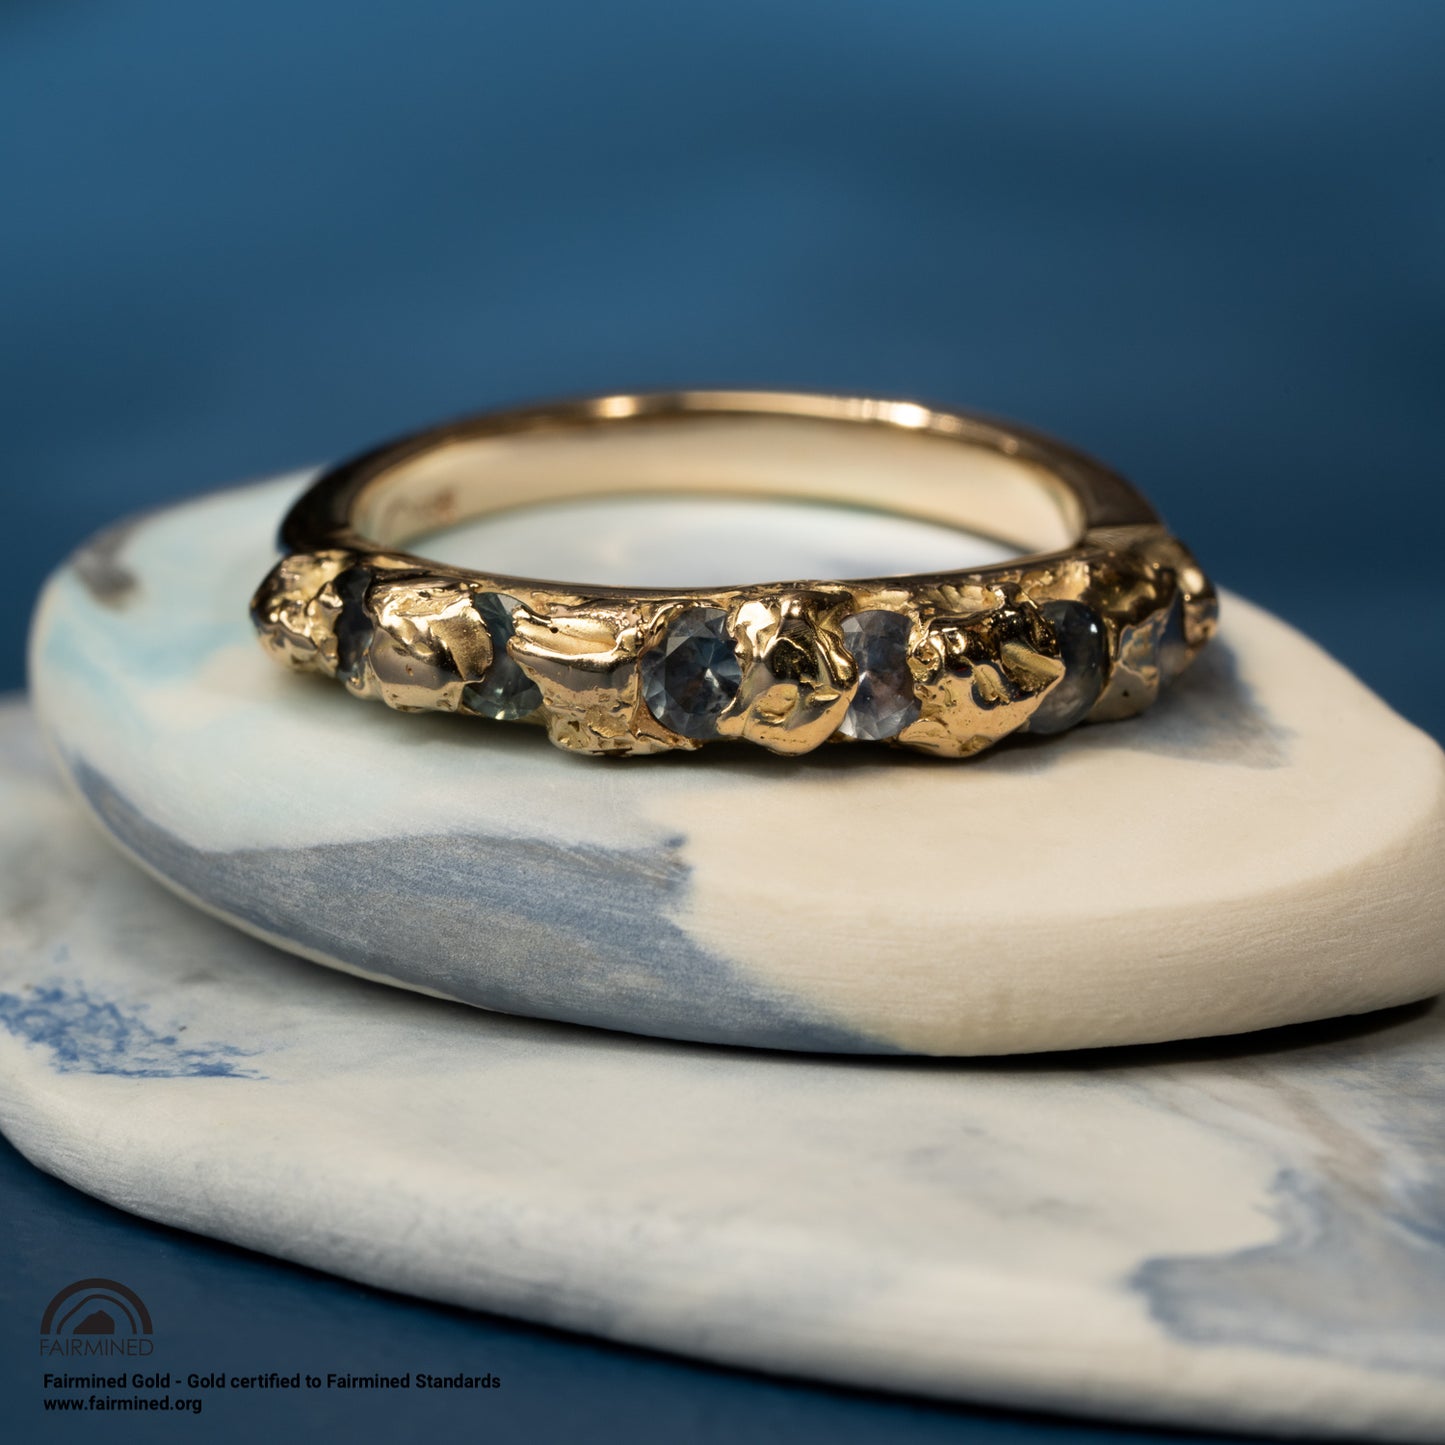 Oasis Row Kimberlite in Fairmined Eco Yellow Gold